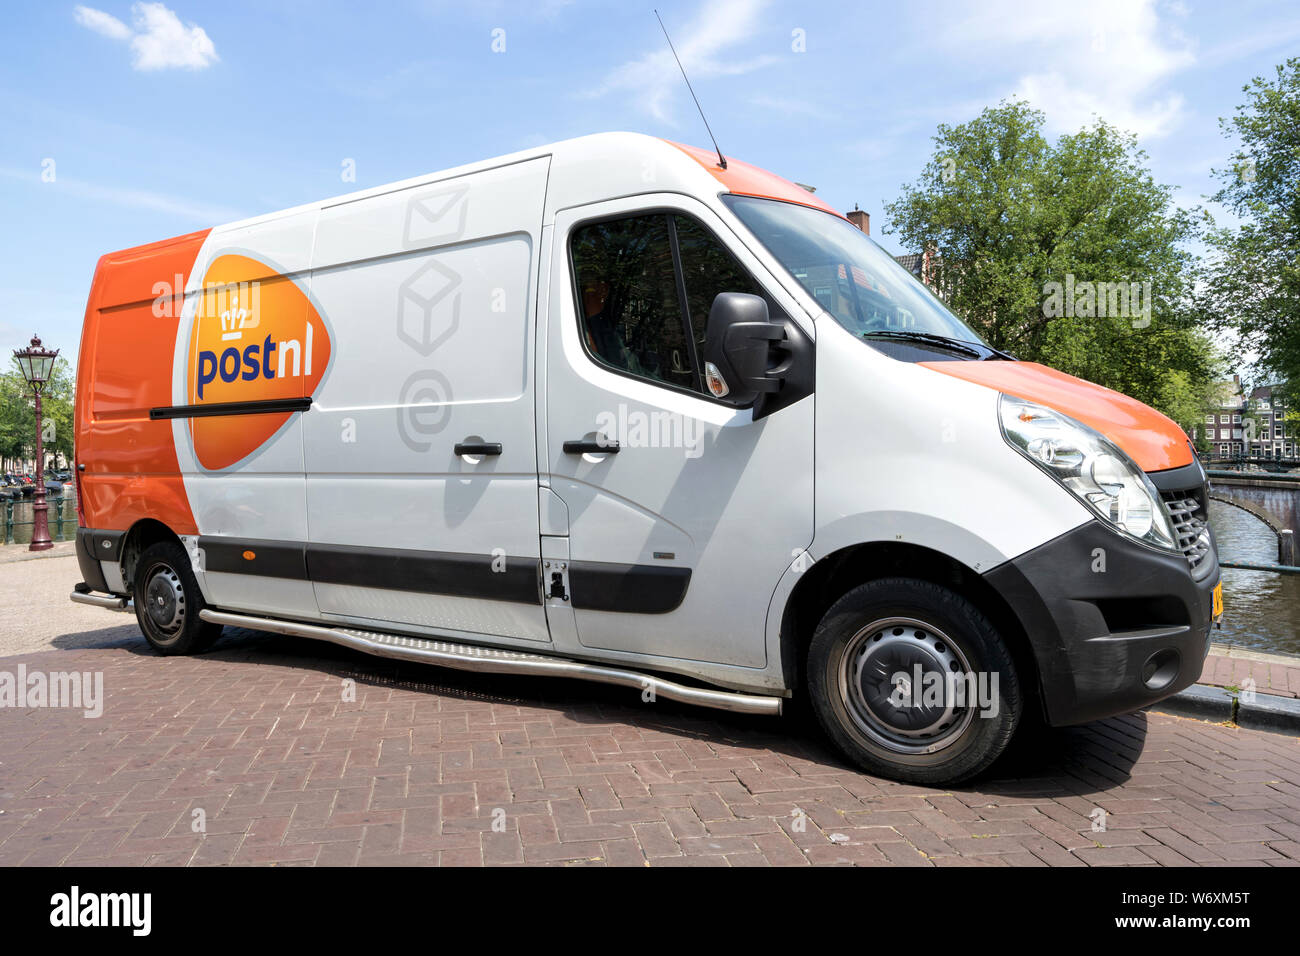 PostNL delivery van. PostNL is a mail, parcel and e-commerce corporation with operations in the Netherlands, Germany, Italy, Belgium, and the UK. Stock Photo